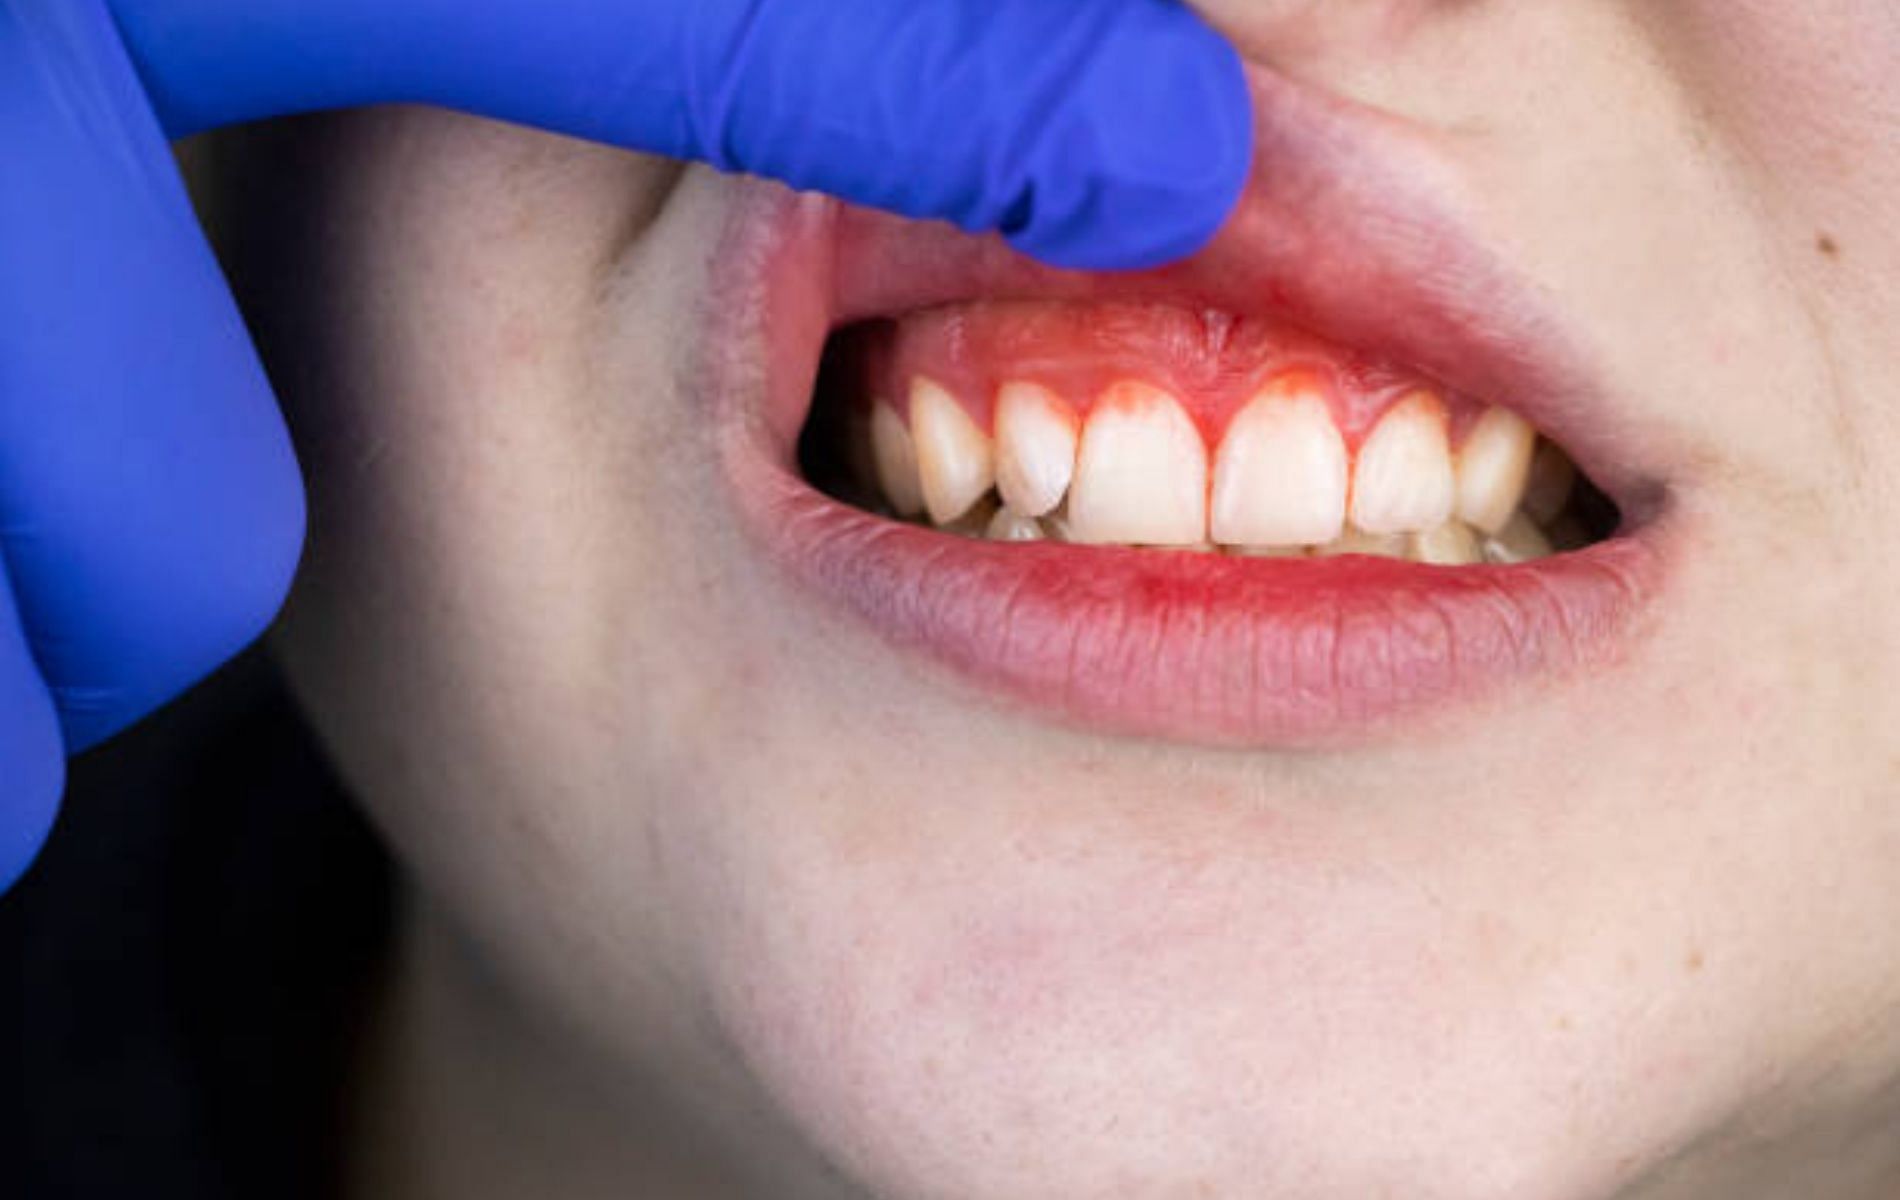 Oral trauma can also cause severe damage to the mucosal lining. (Image via iStockphoto)